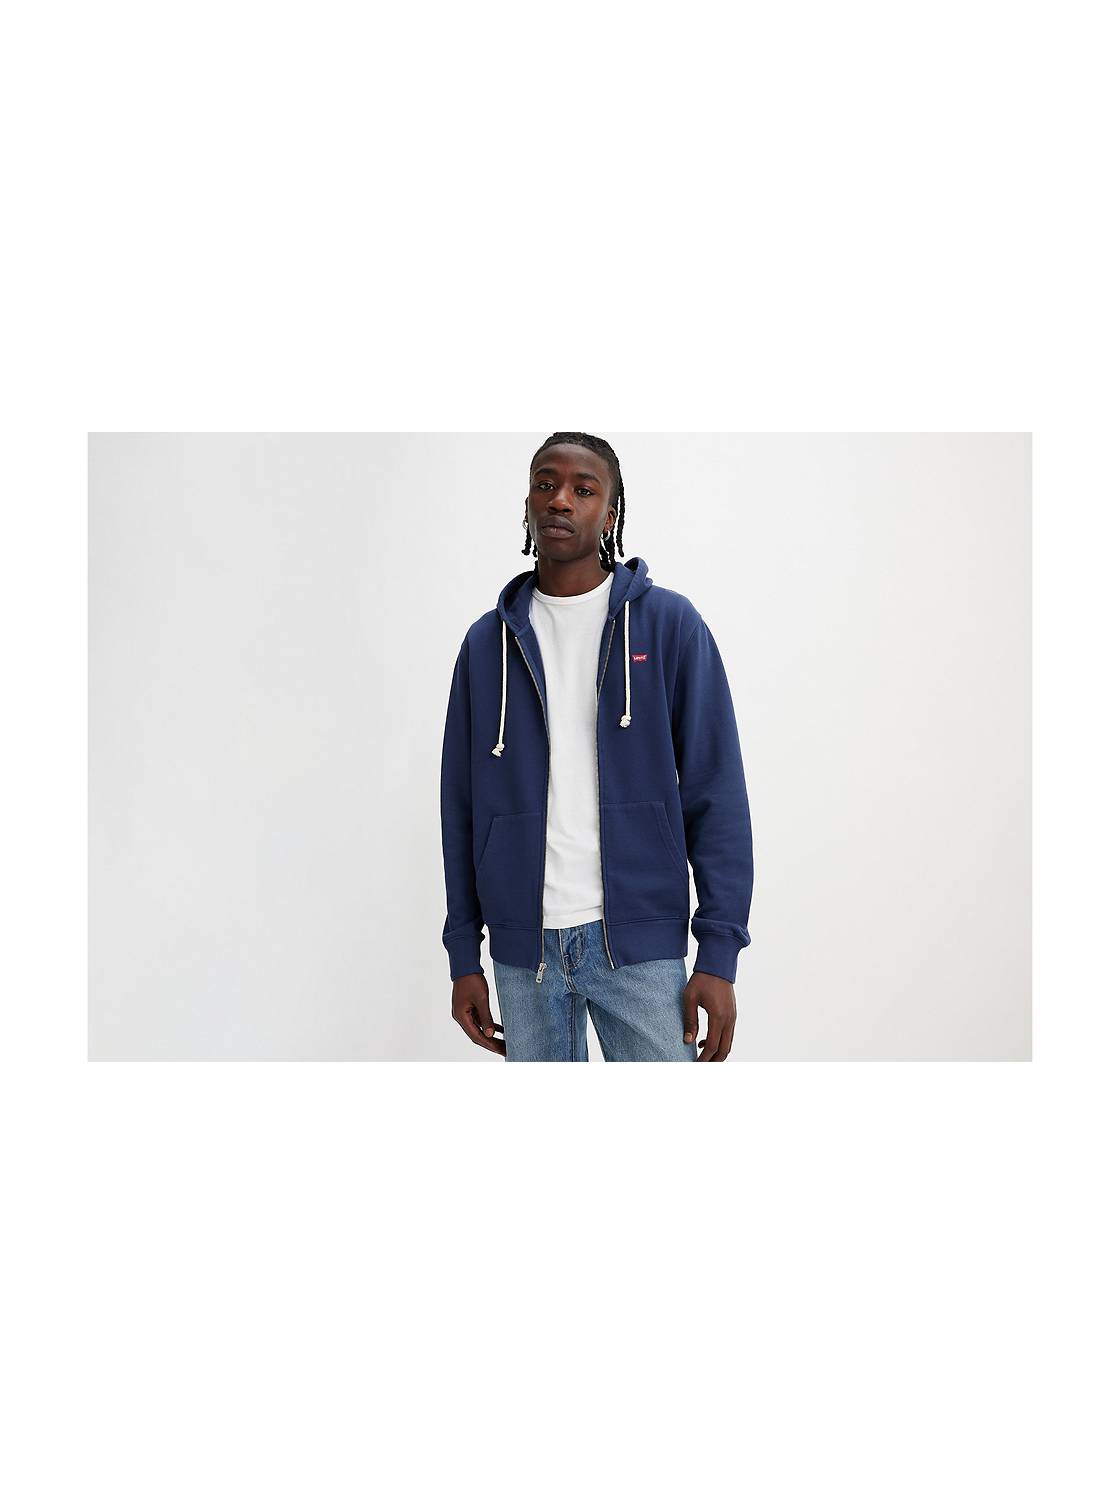 Gap 90s Archive Re-Issue 2023 Men's Collection